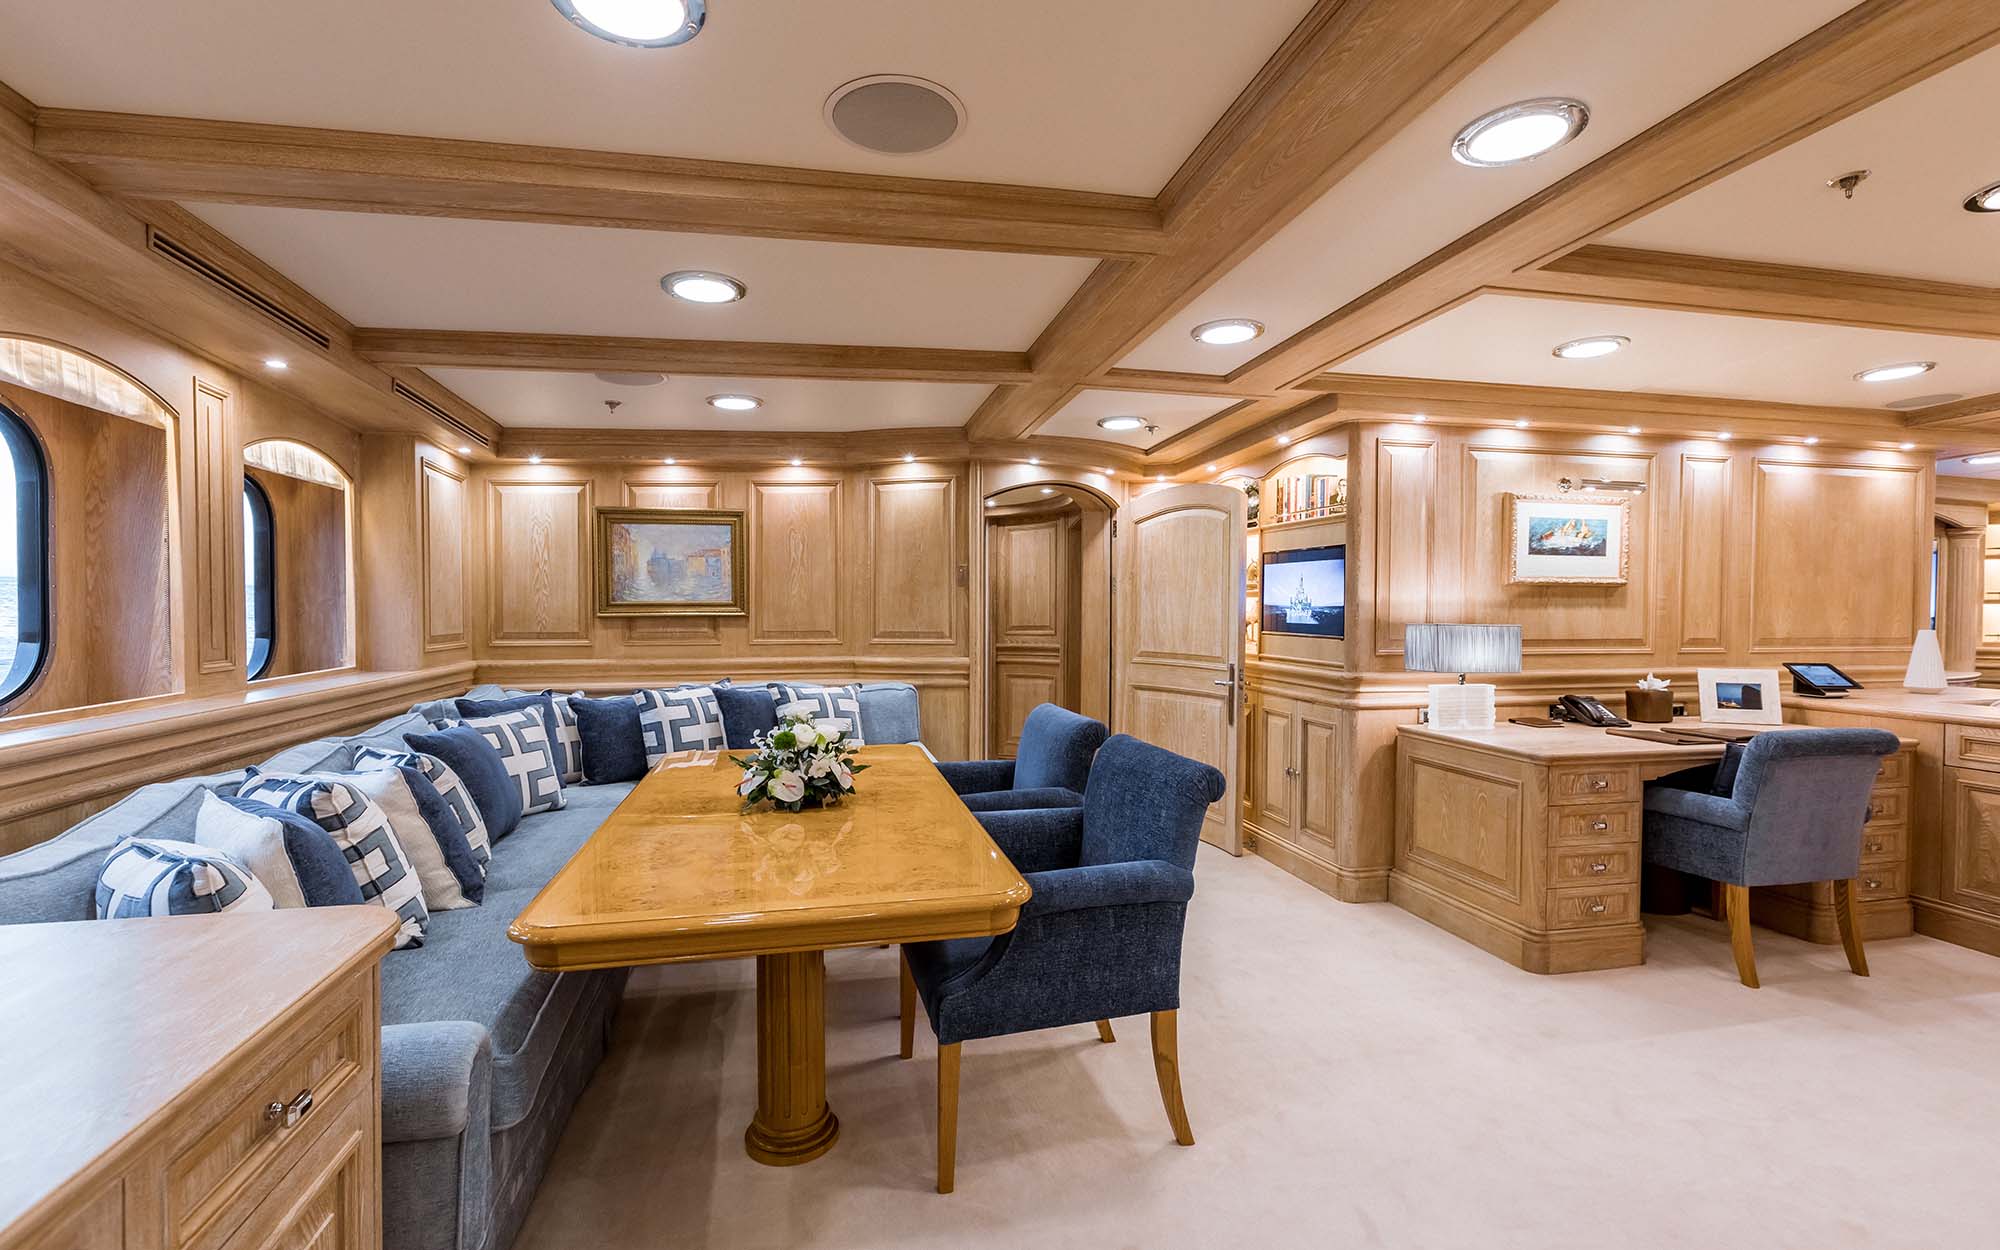 NERO yacht master suite private dining with banked seating